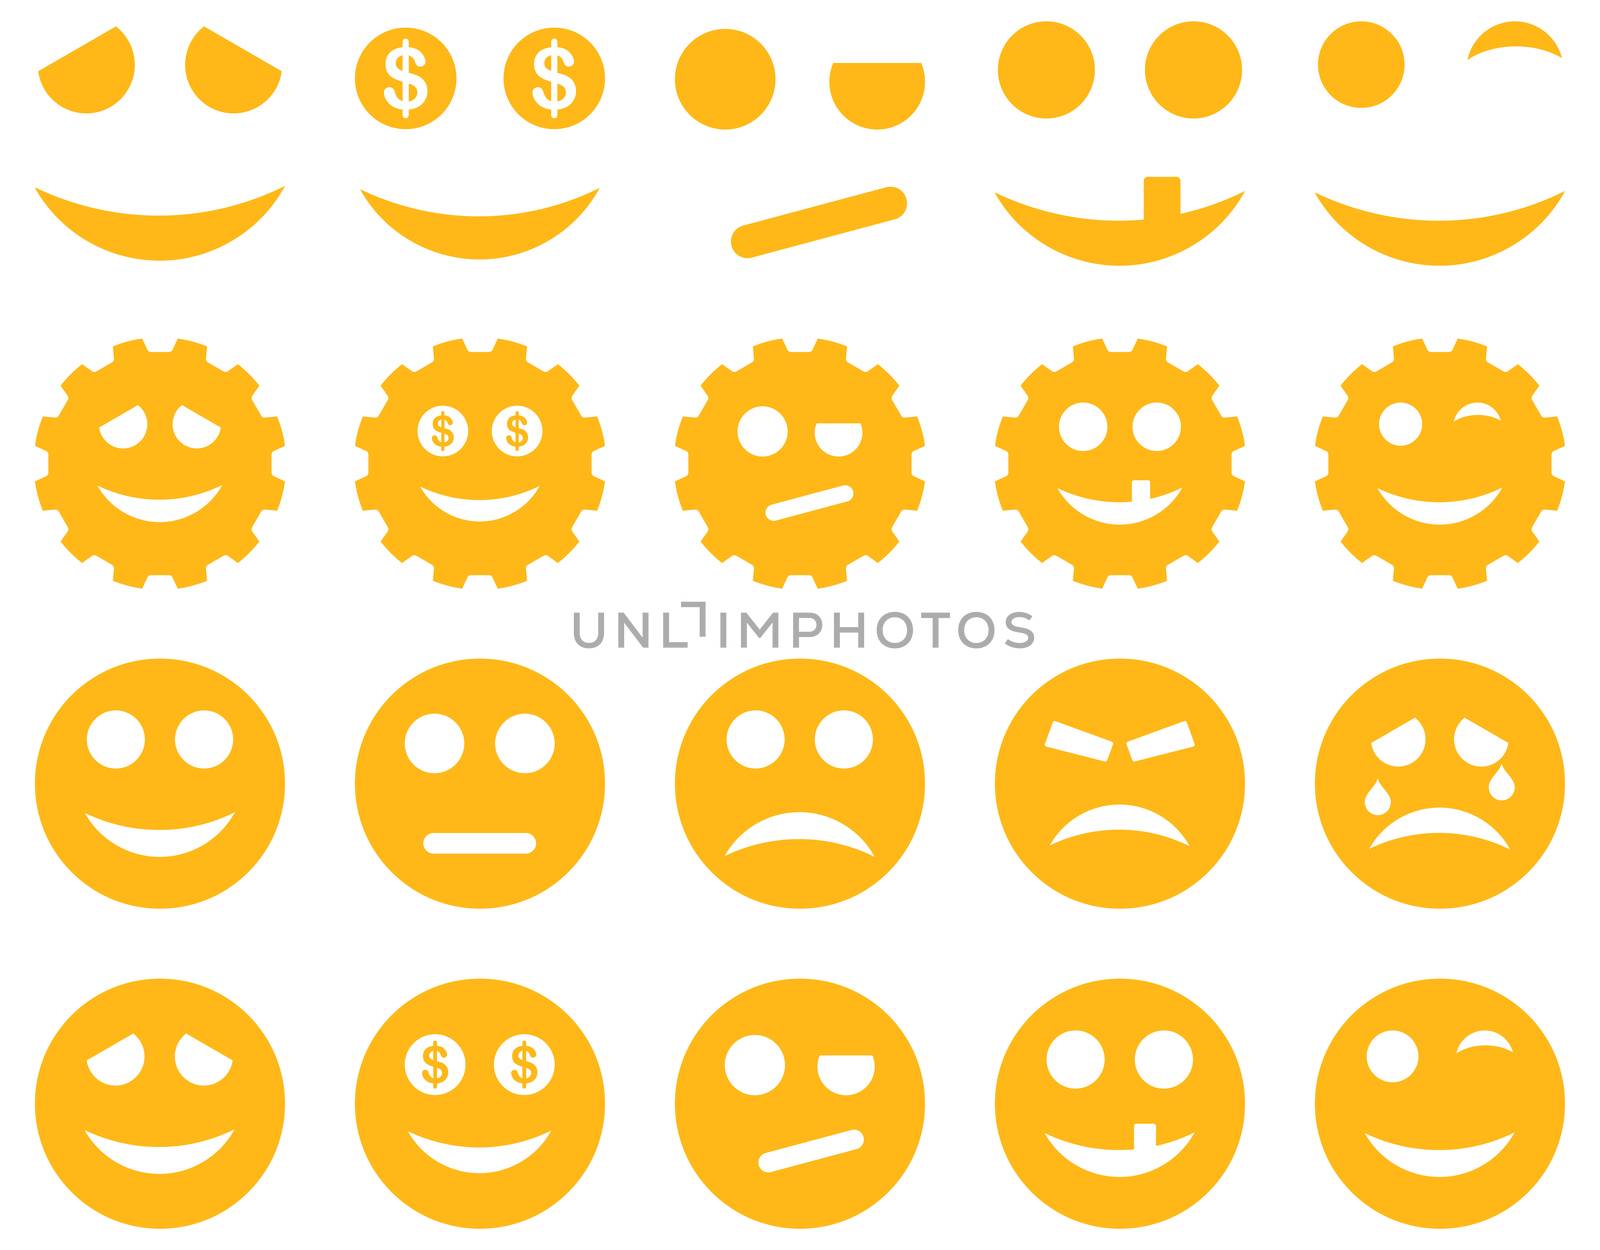 Tools, gears, smiles, emoticons icons. Glyph set style is flat images, yellow symbols, isolated on a white background.